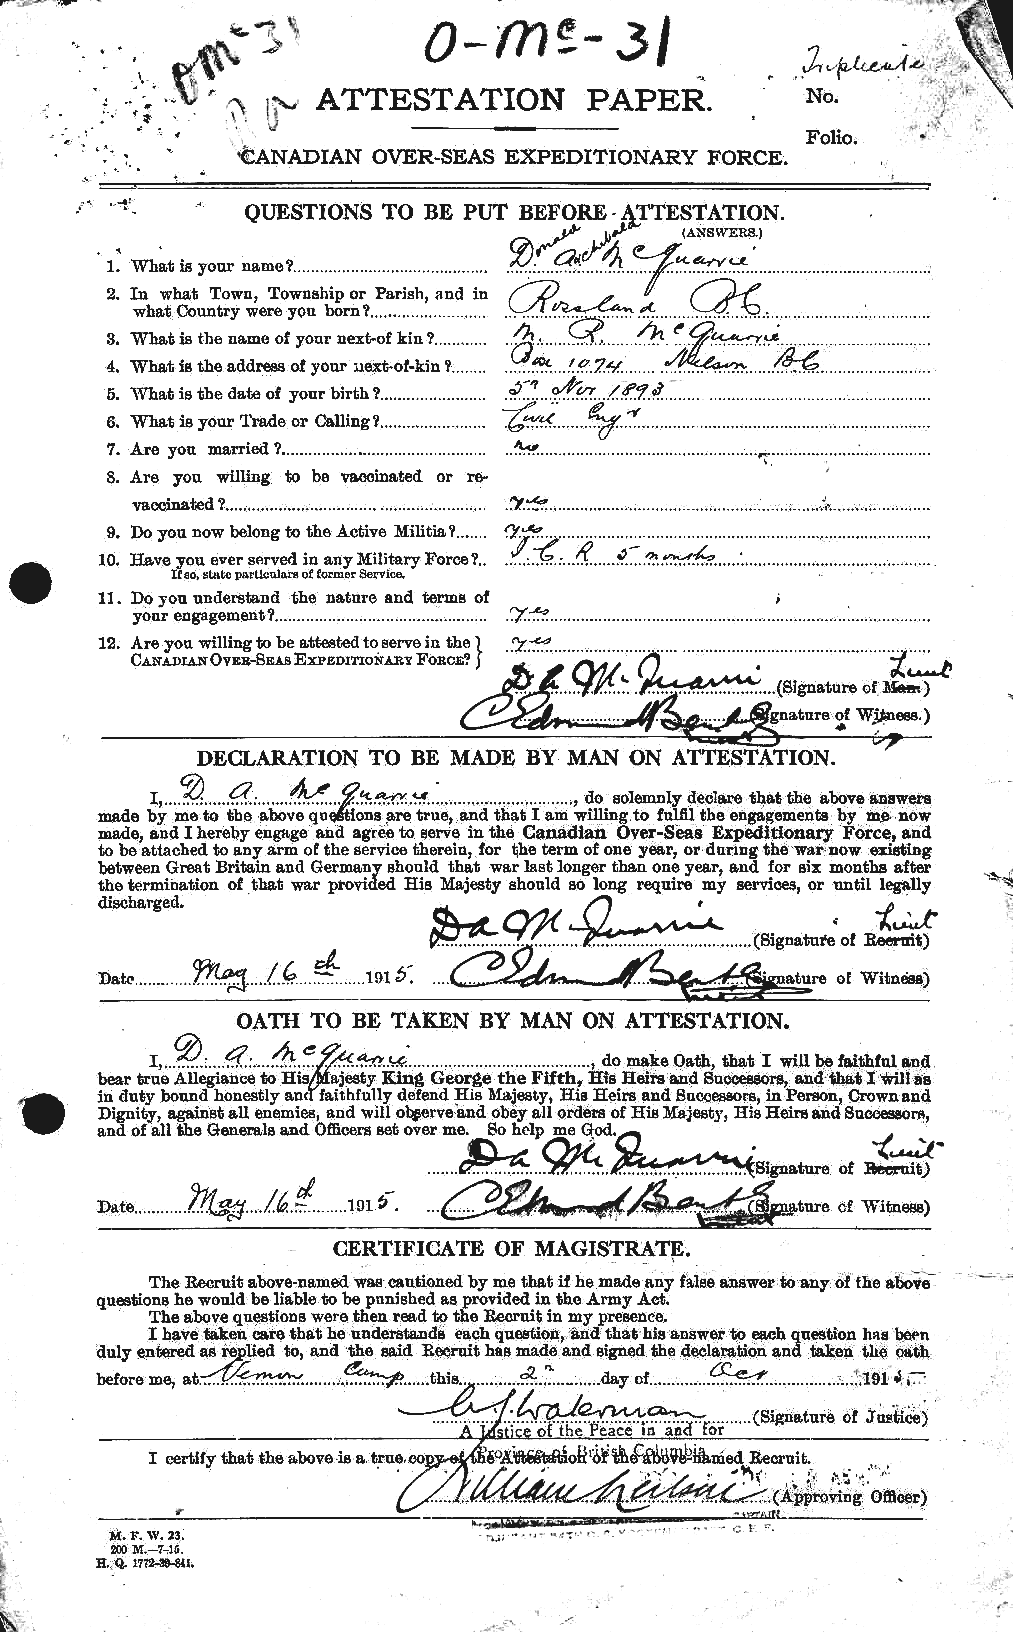 Personnel Records of the First World War - CEF 545778a